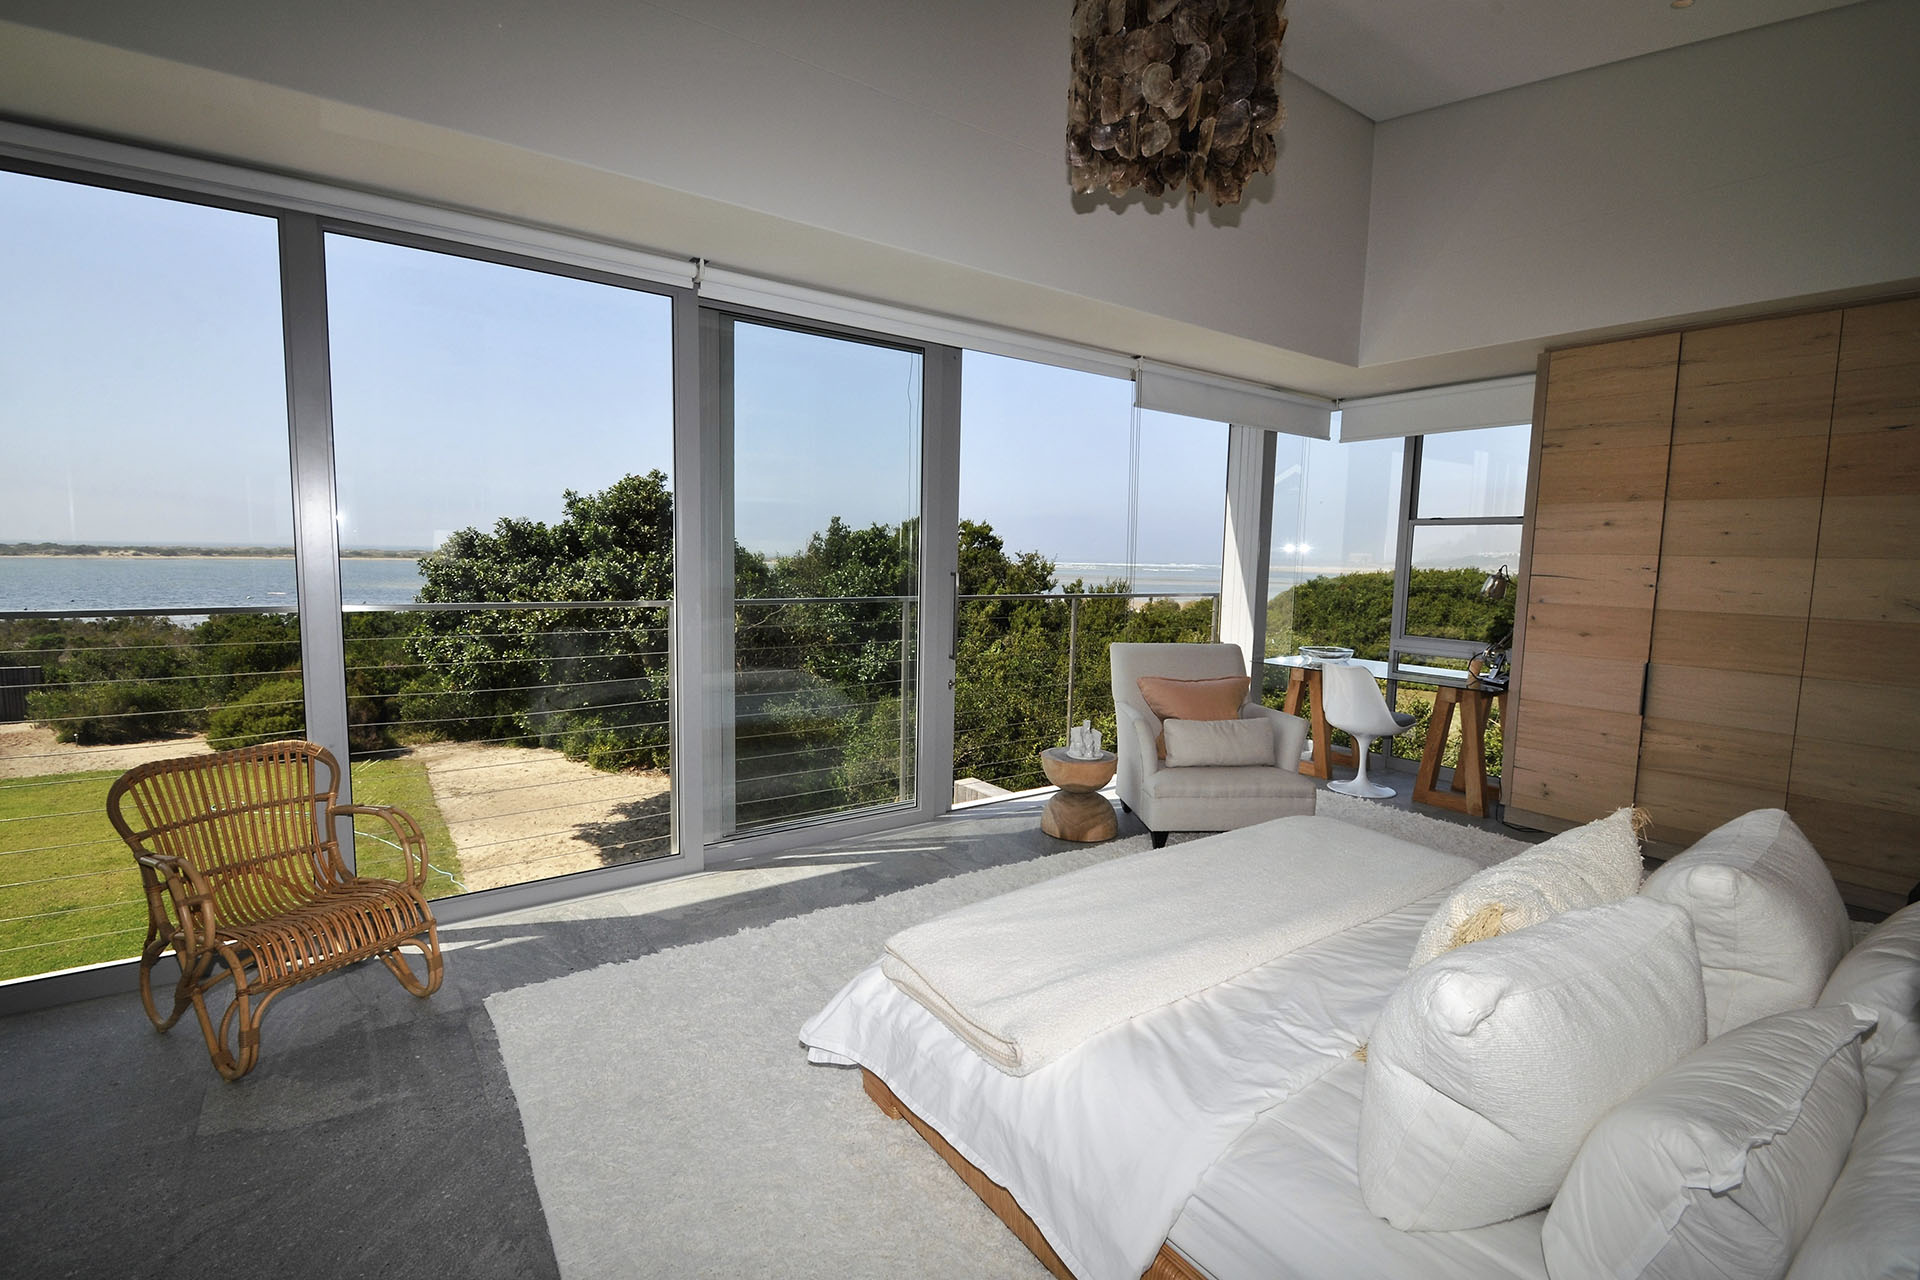 Photo 10 of The Dune House accommodation in Plettenberg Bay, Cape Town with 6 bedrooms and 7 bathrooms